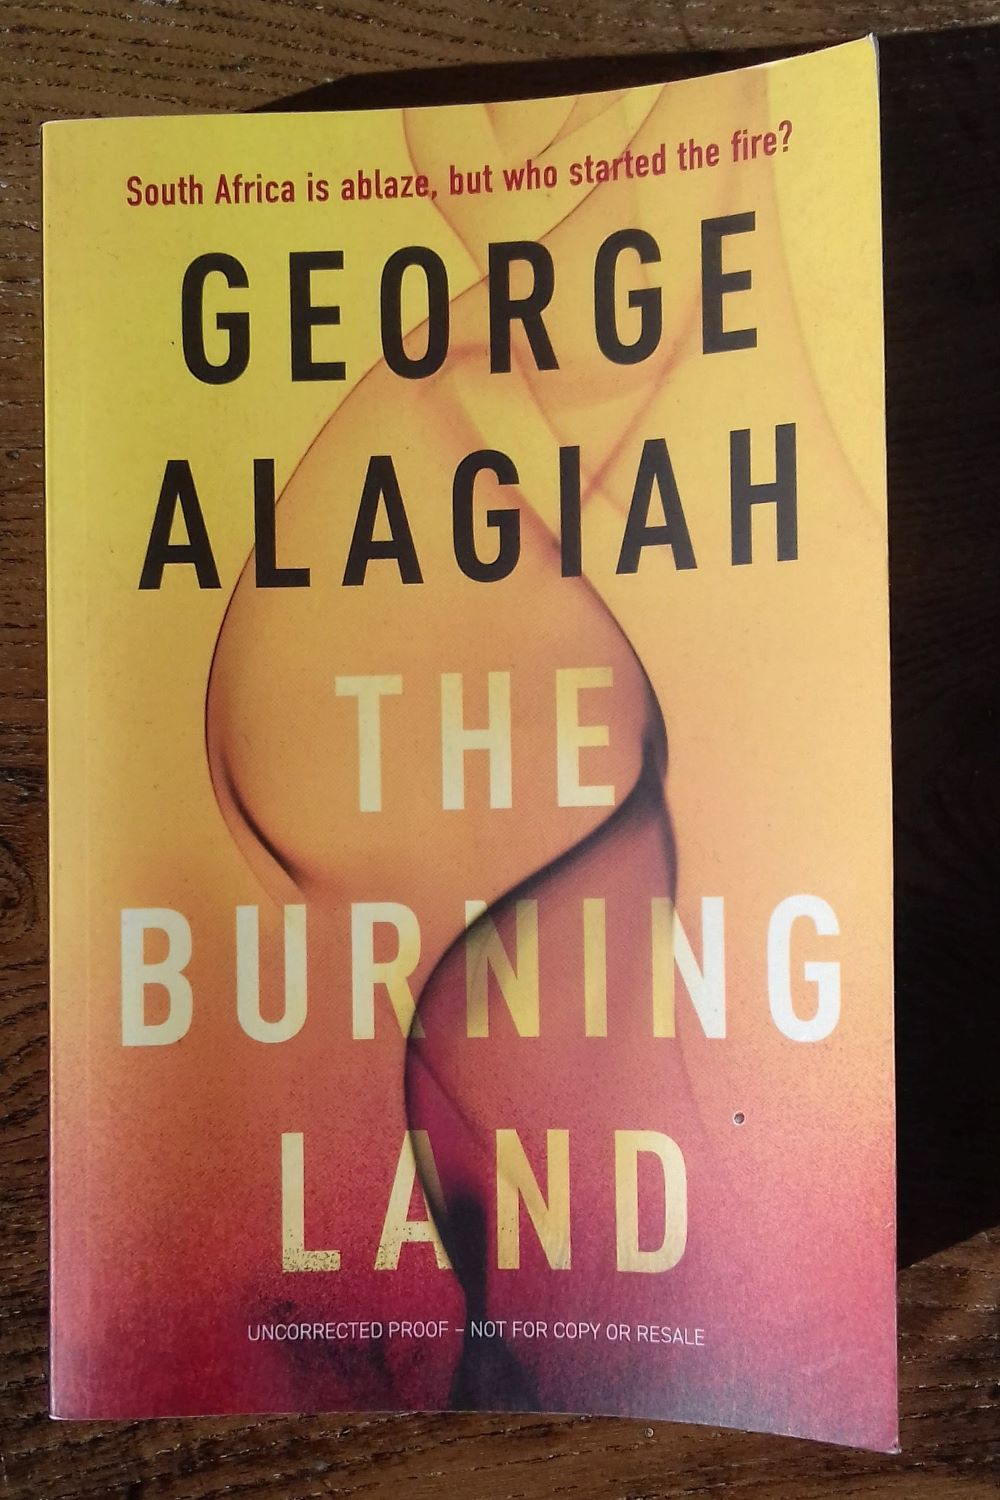 Book review: The Burning Land by George Alagiah